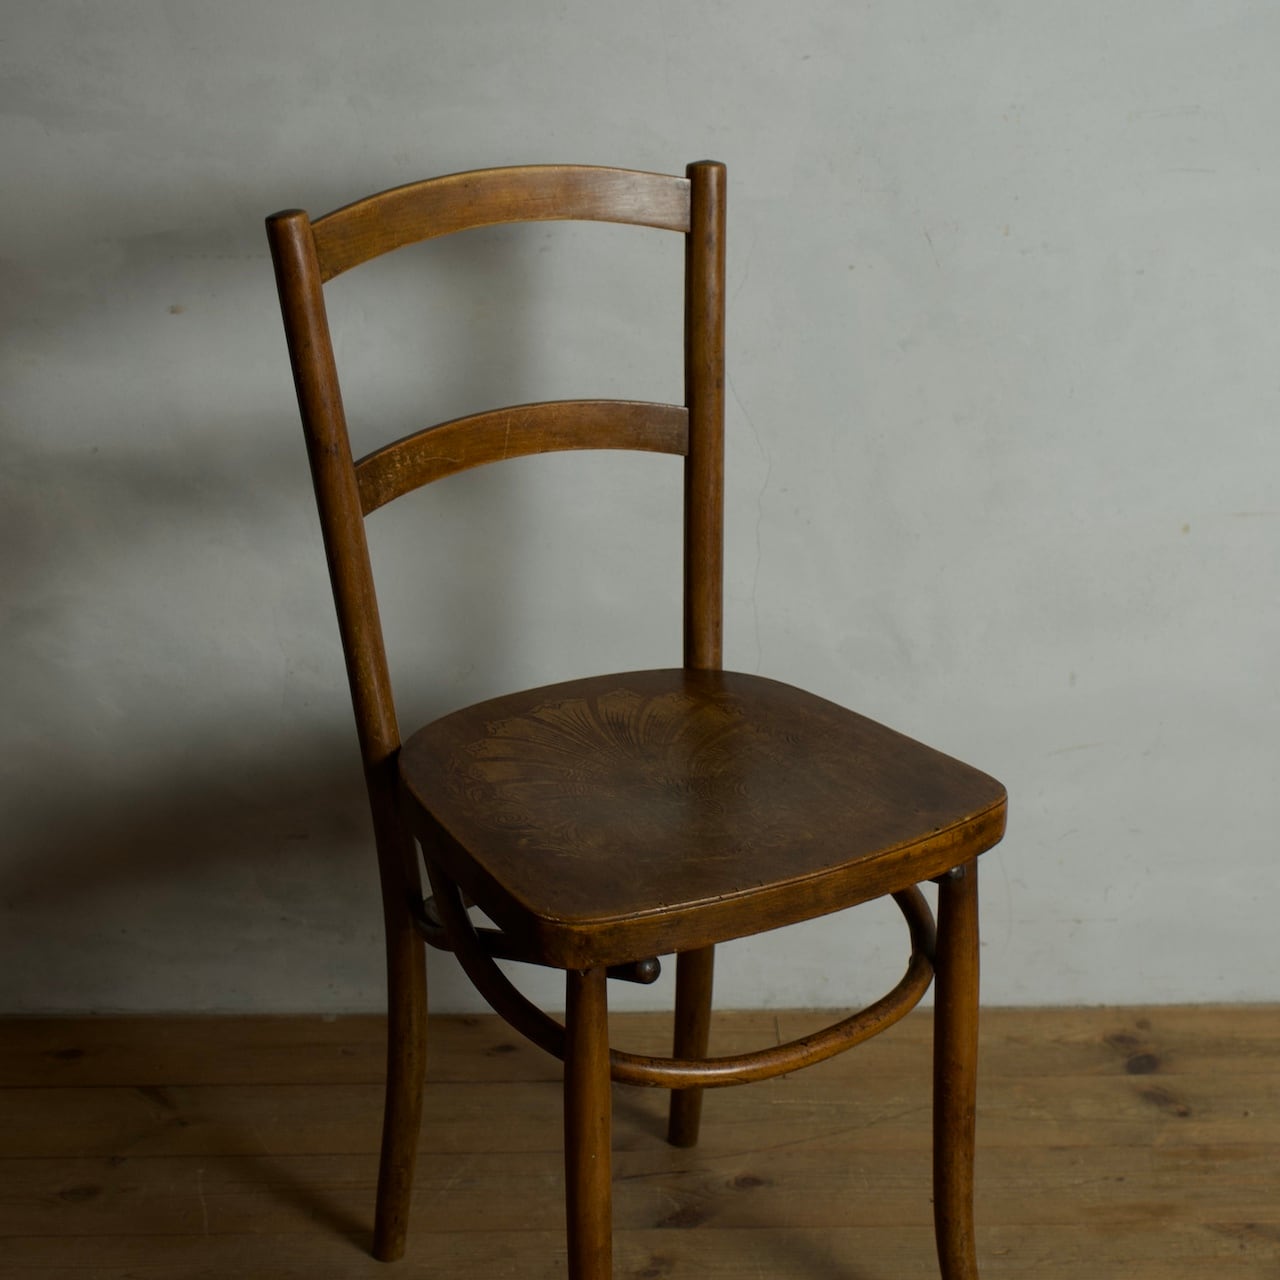 Bentwood Chair / ベントウッド チェア〈チェア・椅子・ダイニングチェア・デスクチェア・曲木〉112476 | SHABBY'S  MARKETPLACE　アンティーク・ヴィンテージ 家具や雑貨のお店 powered by BASE